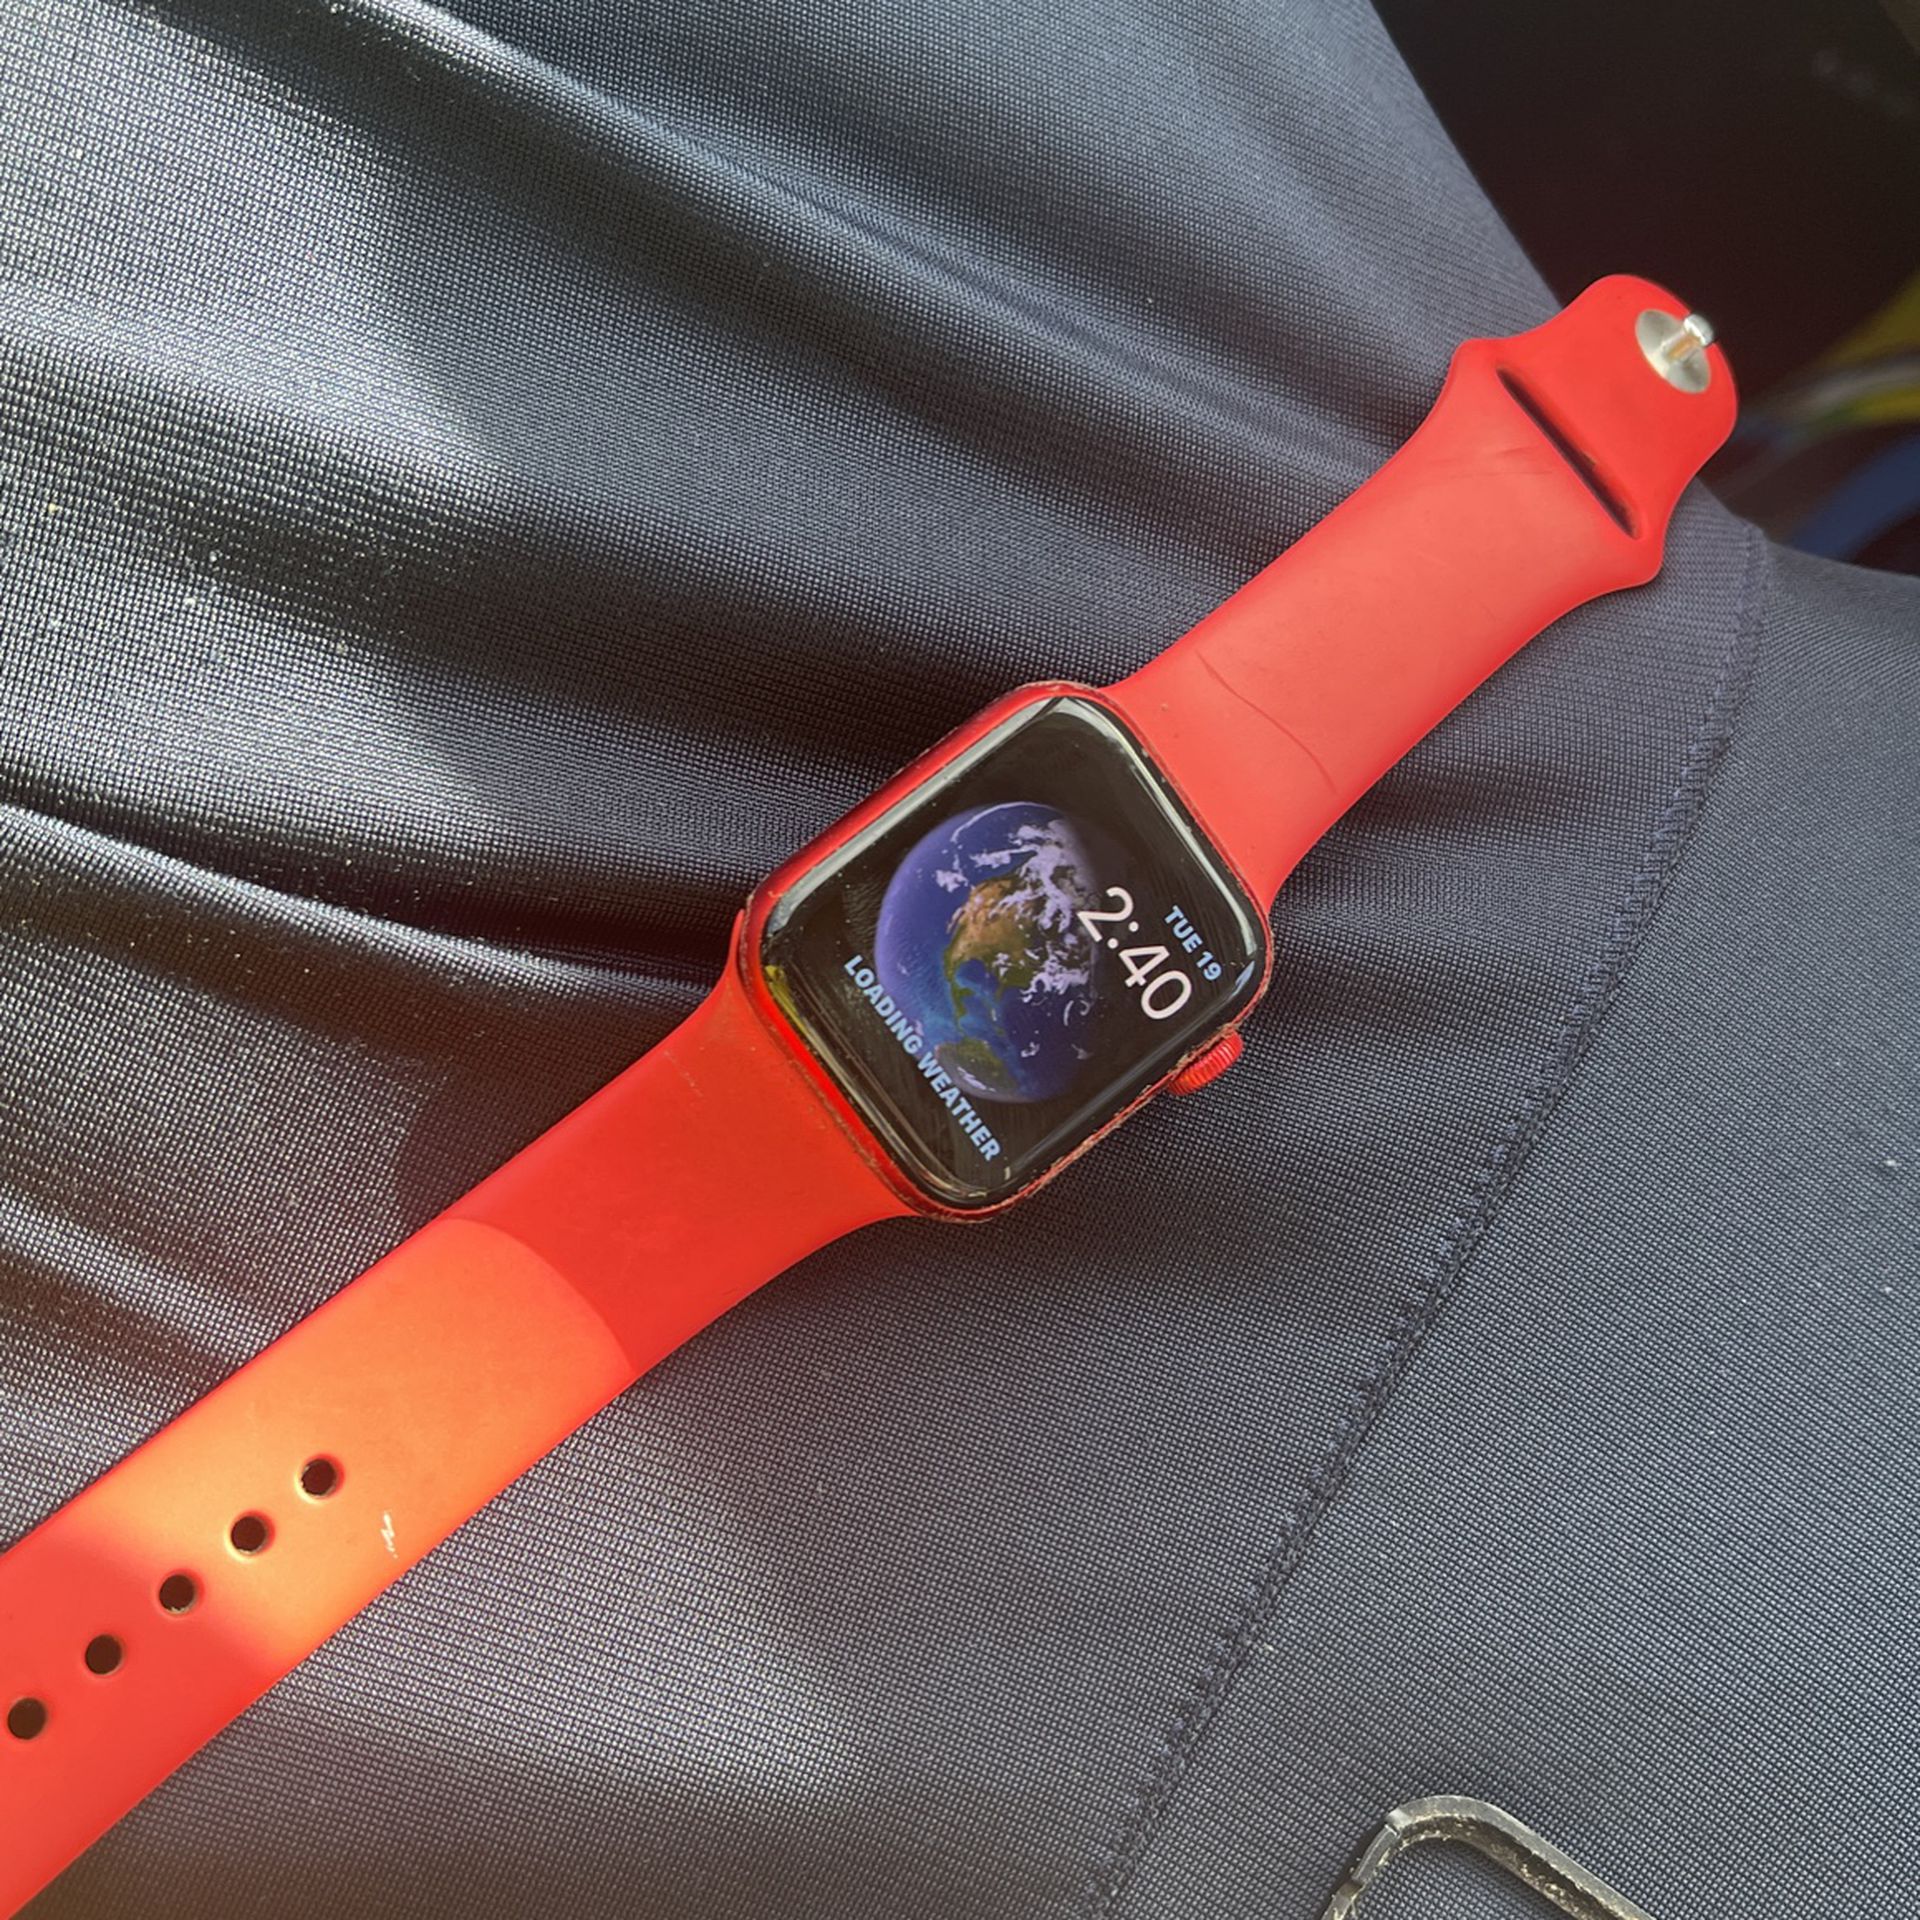 Apple Watch Gen 6 Product red Edition 40 MM